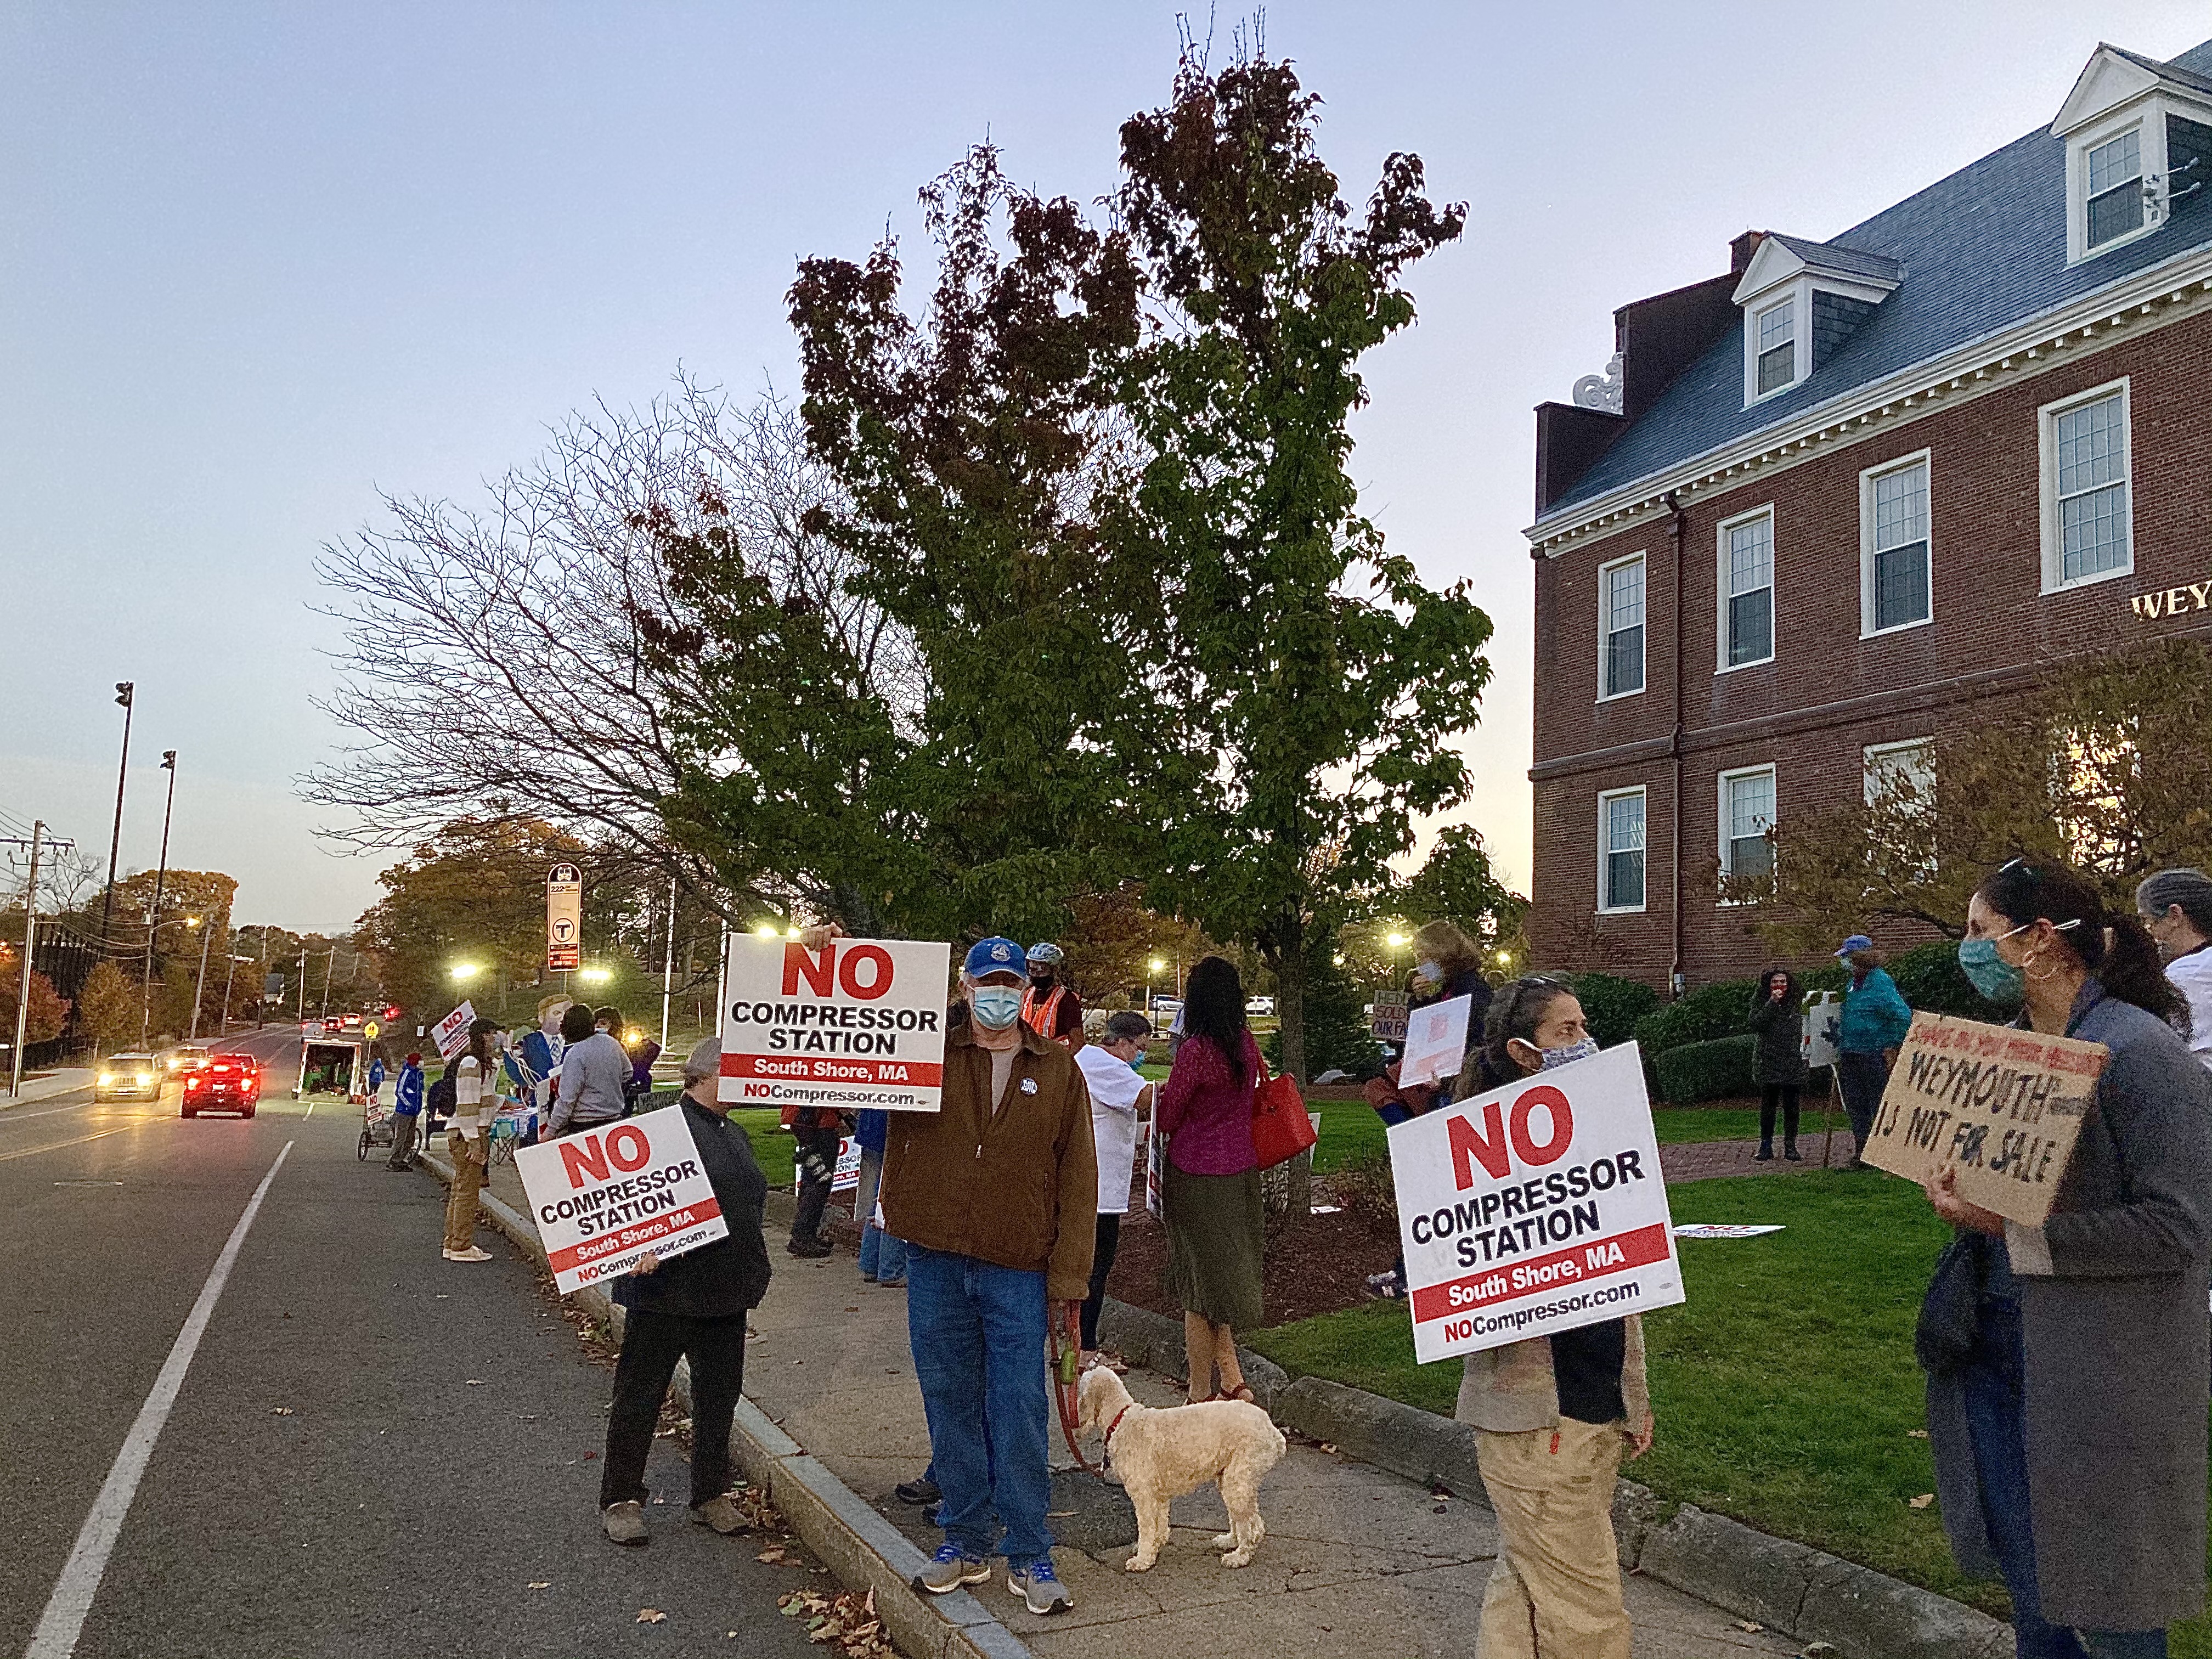 Rob McCarthy (center, blue hat) and other community members demonstrate outside Weymouth Town Hall on November 6, 2020. 